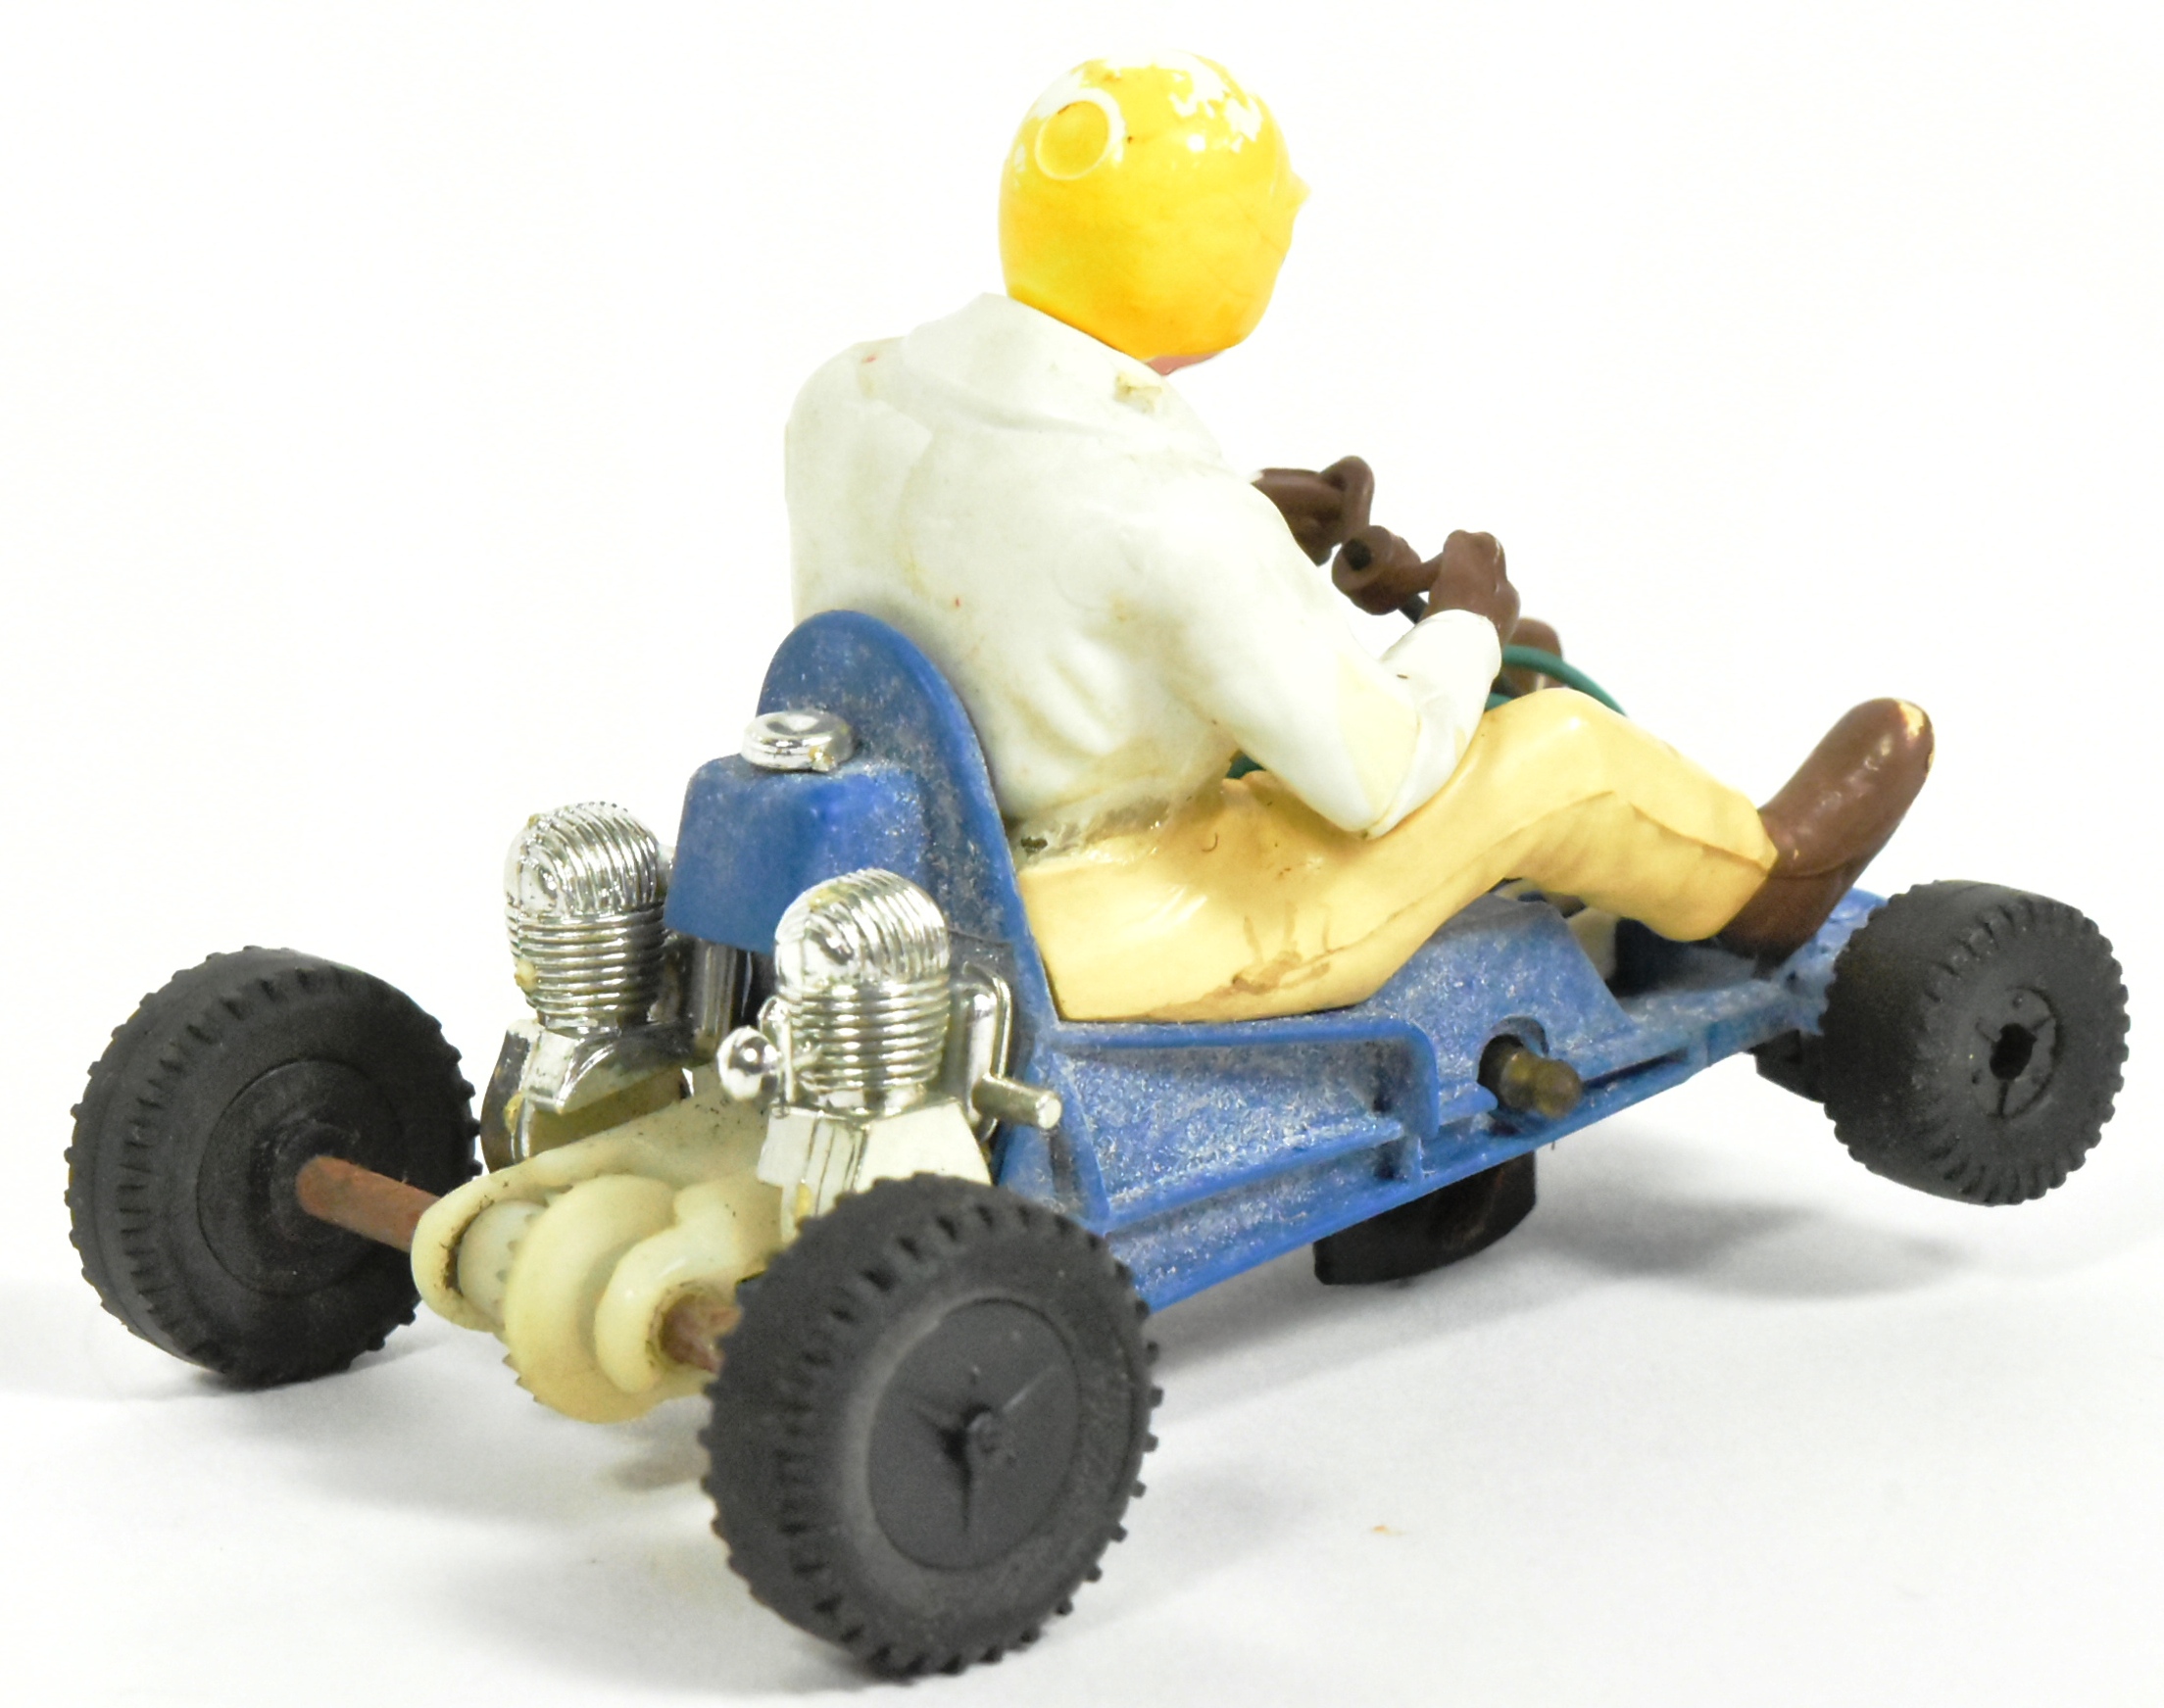 SCALEXTRIC - VINTAGE TRIANG SCALEXTRIC K1 GO KART - Image 3 of 5